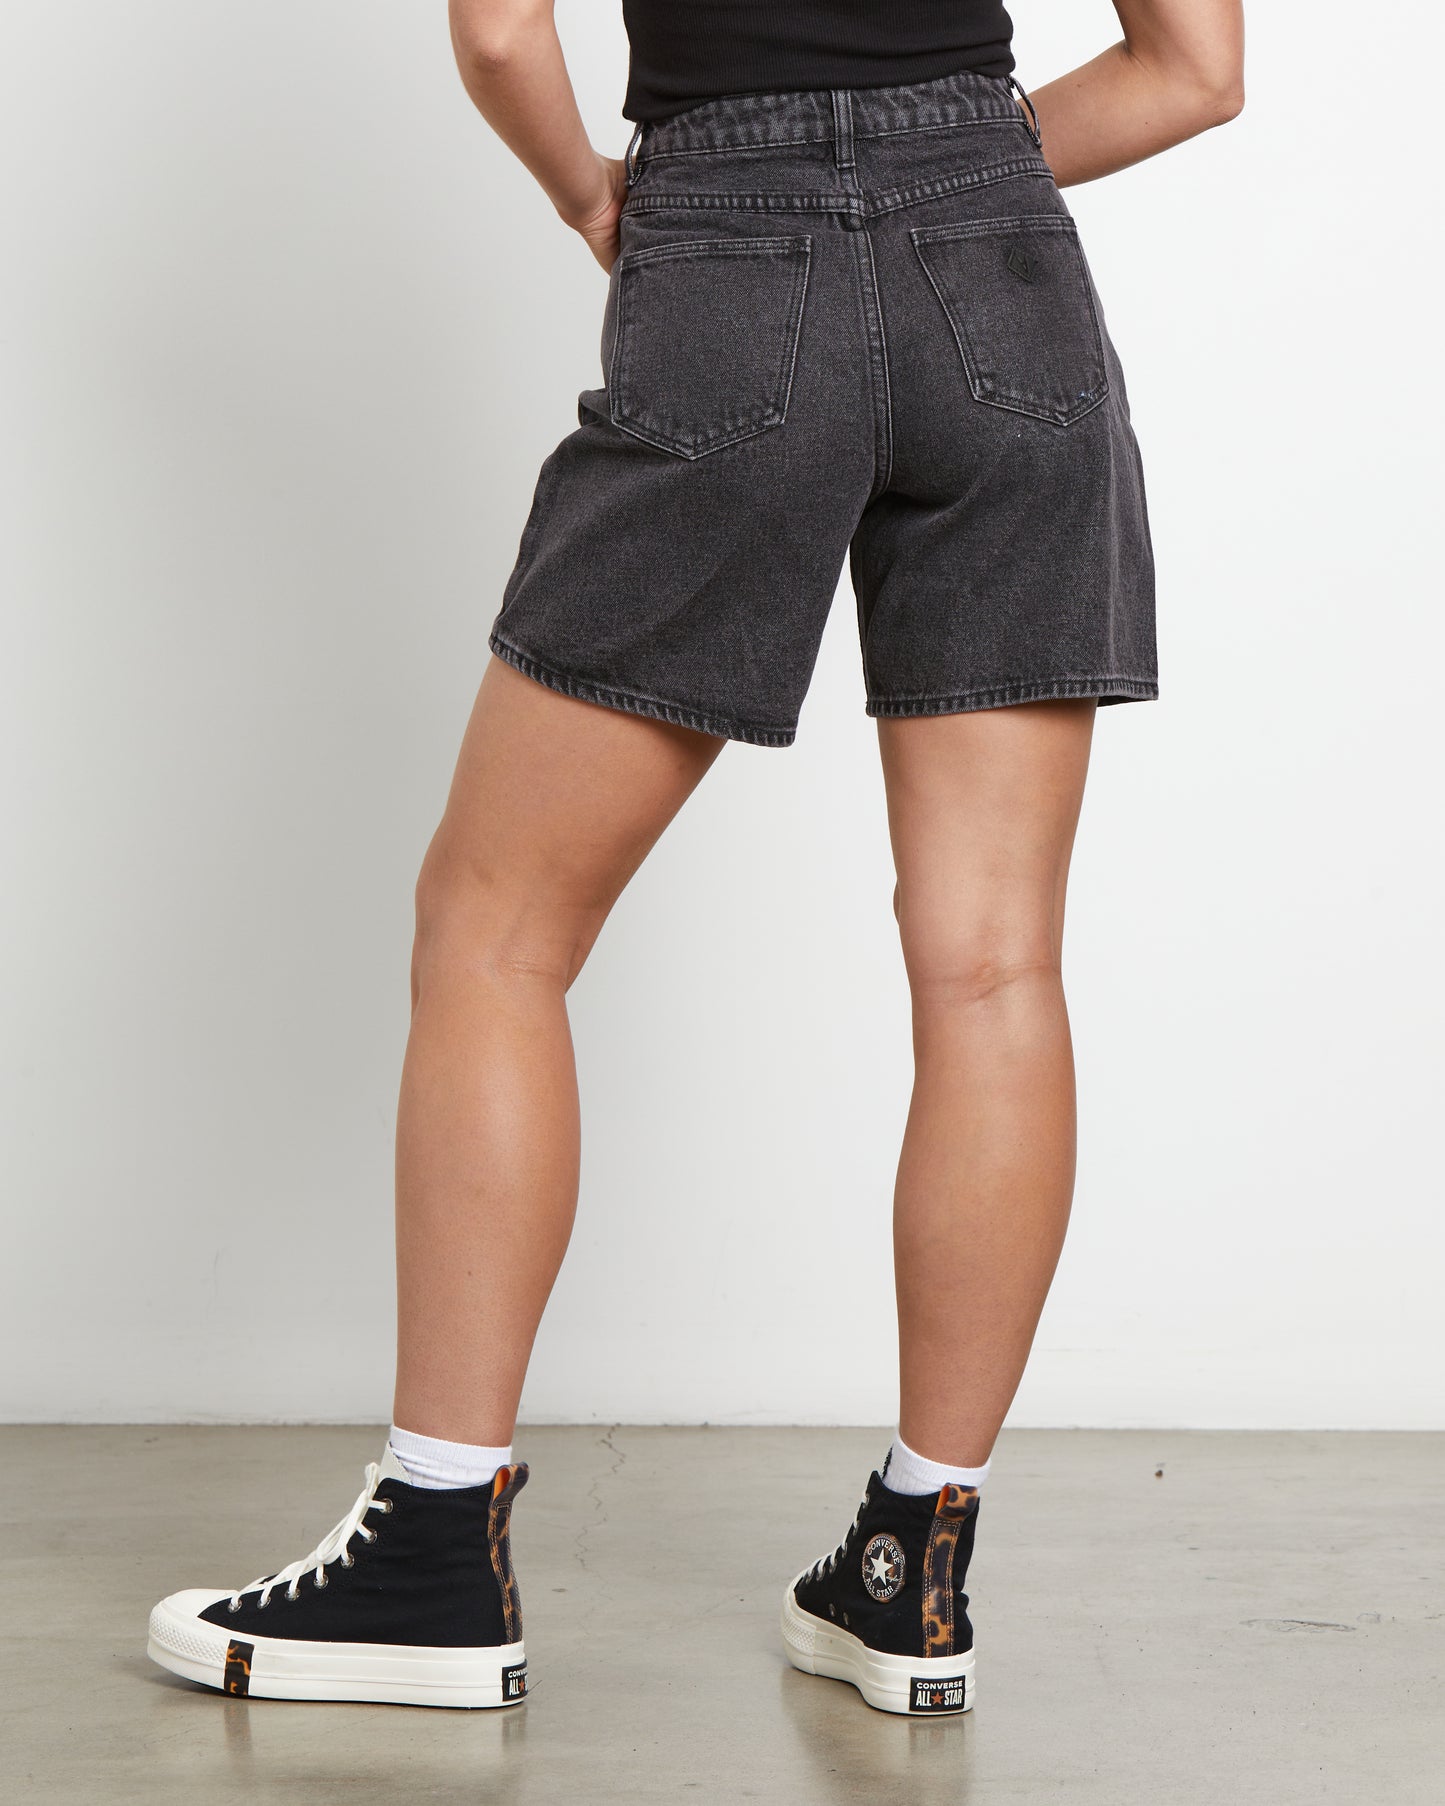 ABRAND // Carrie Short Piper WASHED BLACK